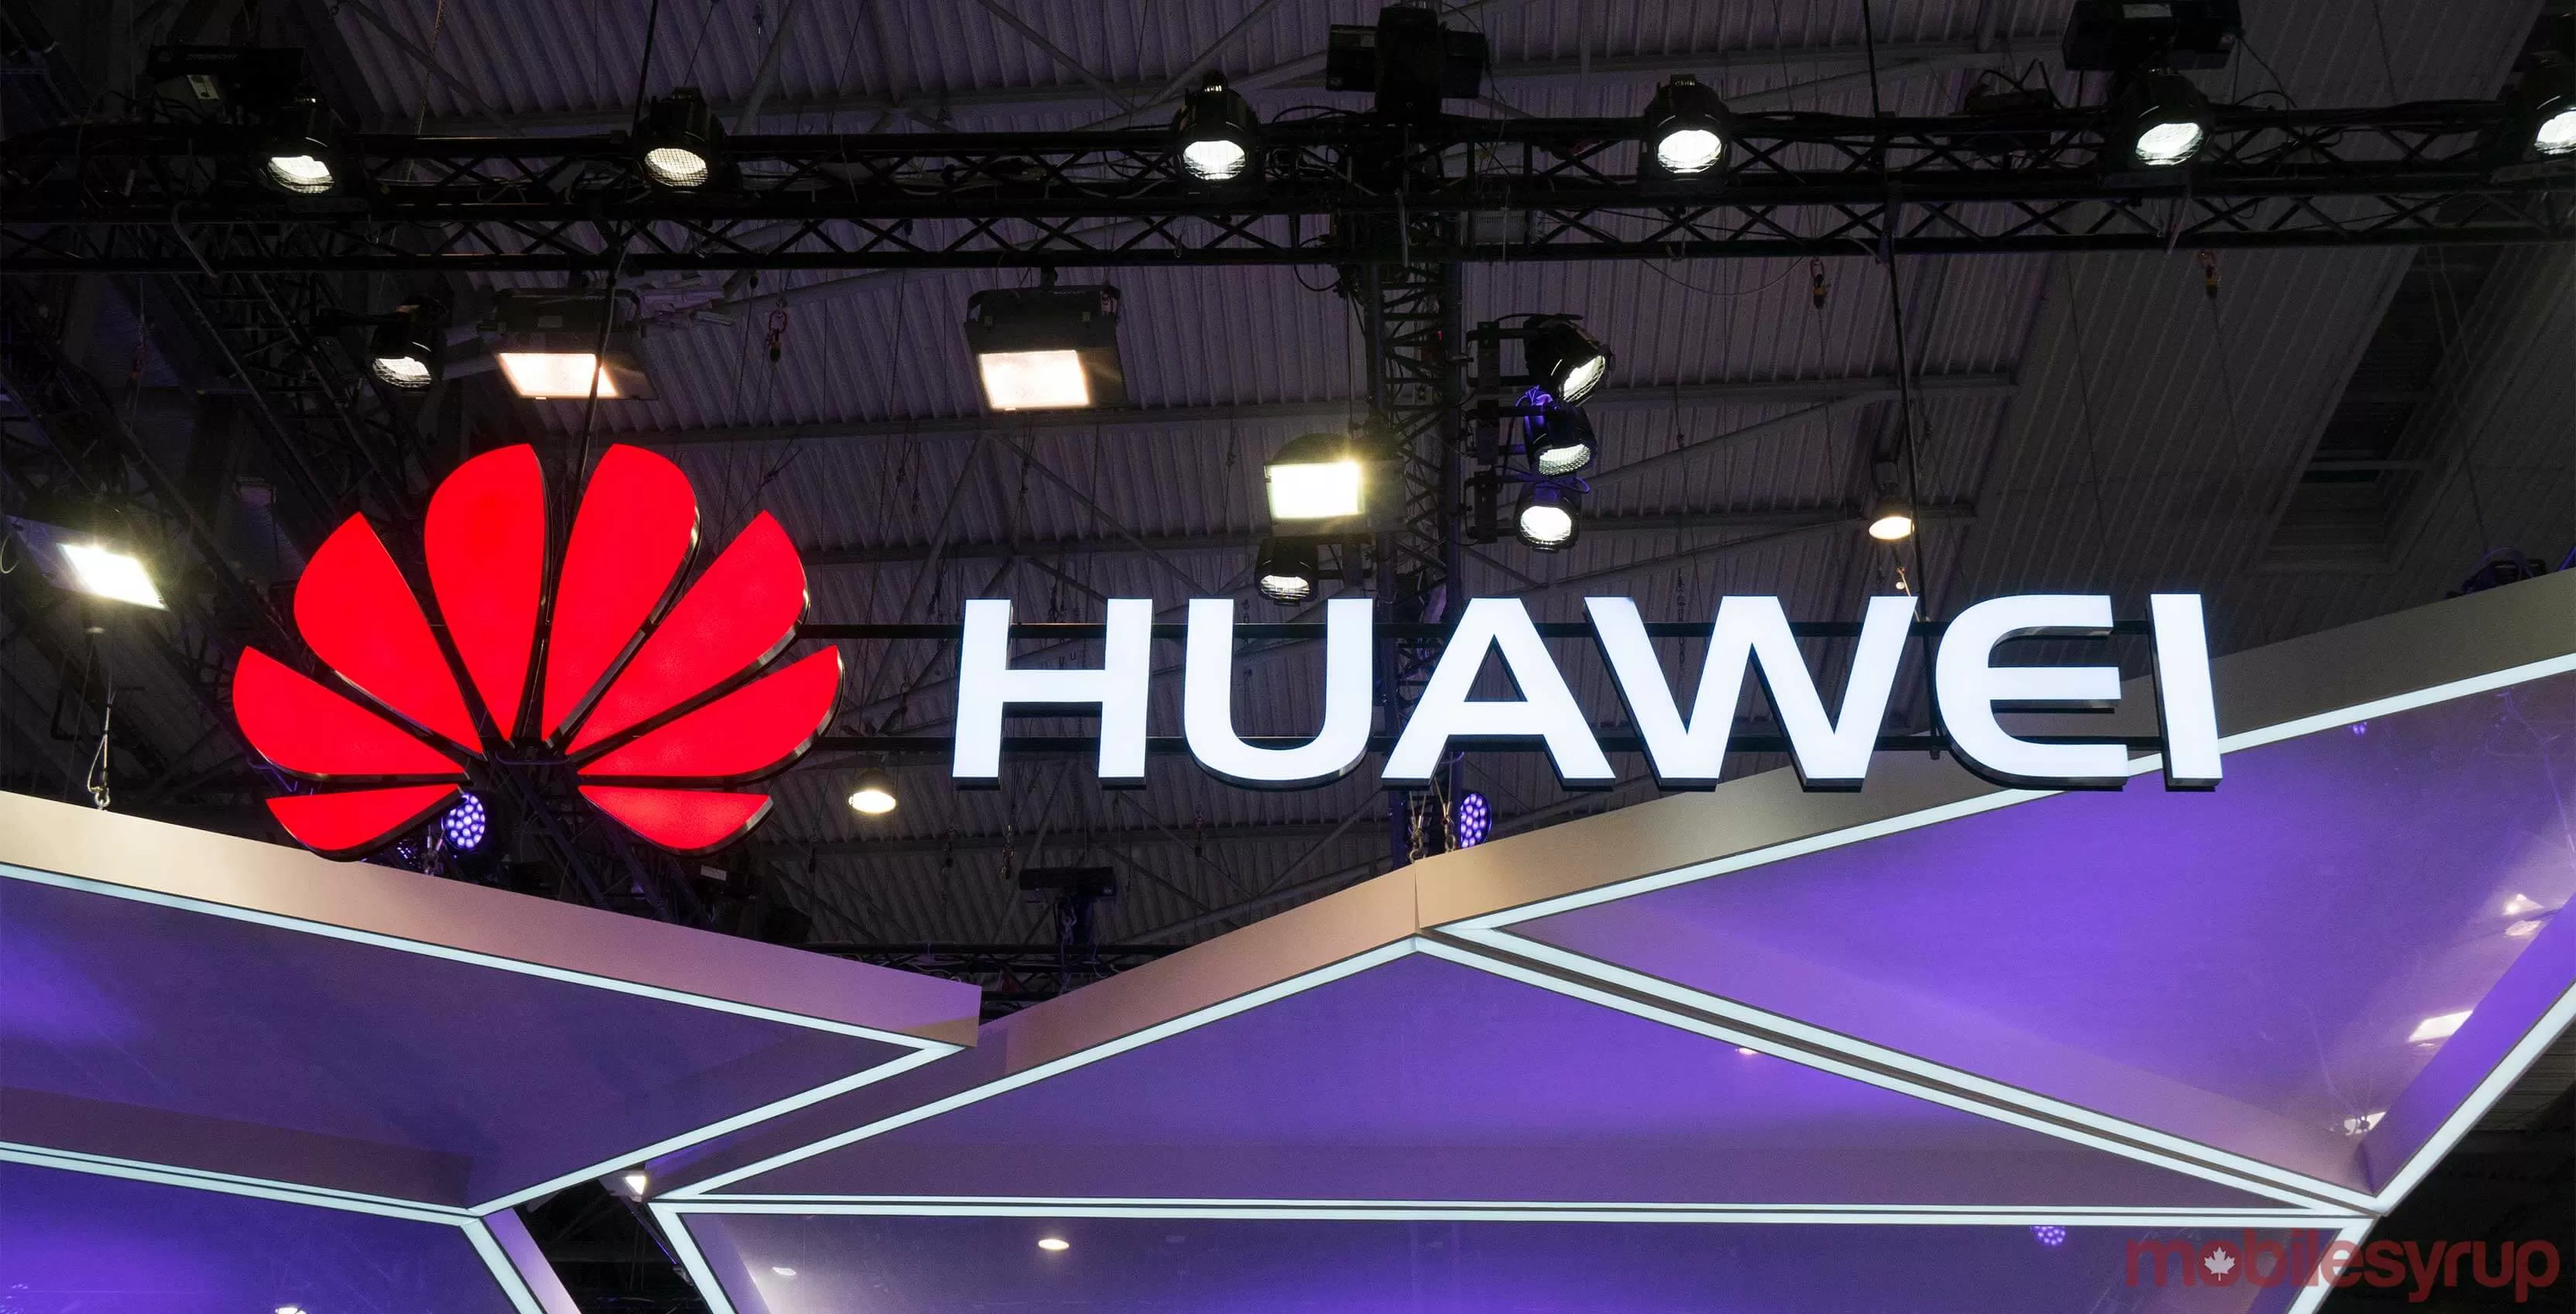 Huawei beats Qualcomm to 7nm with Kirin 980 processor and it's a game changer